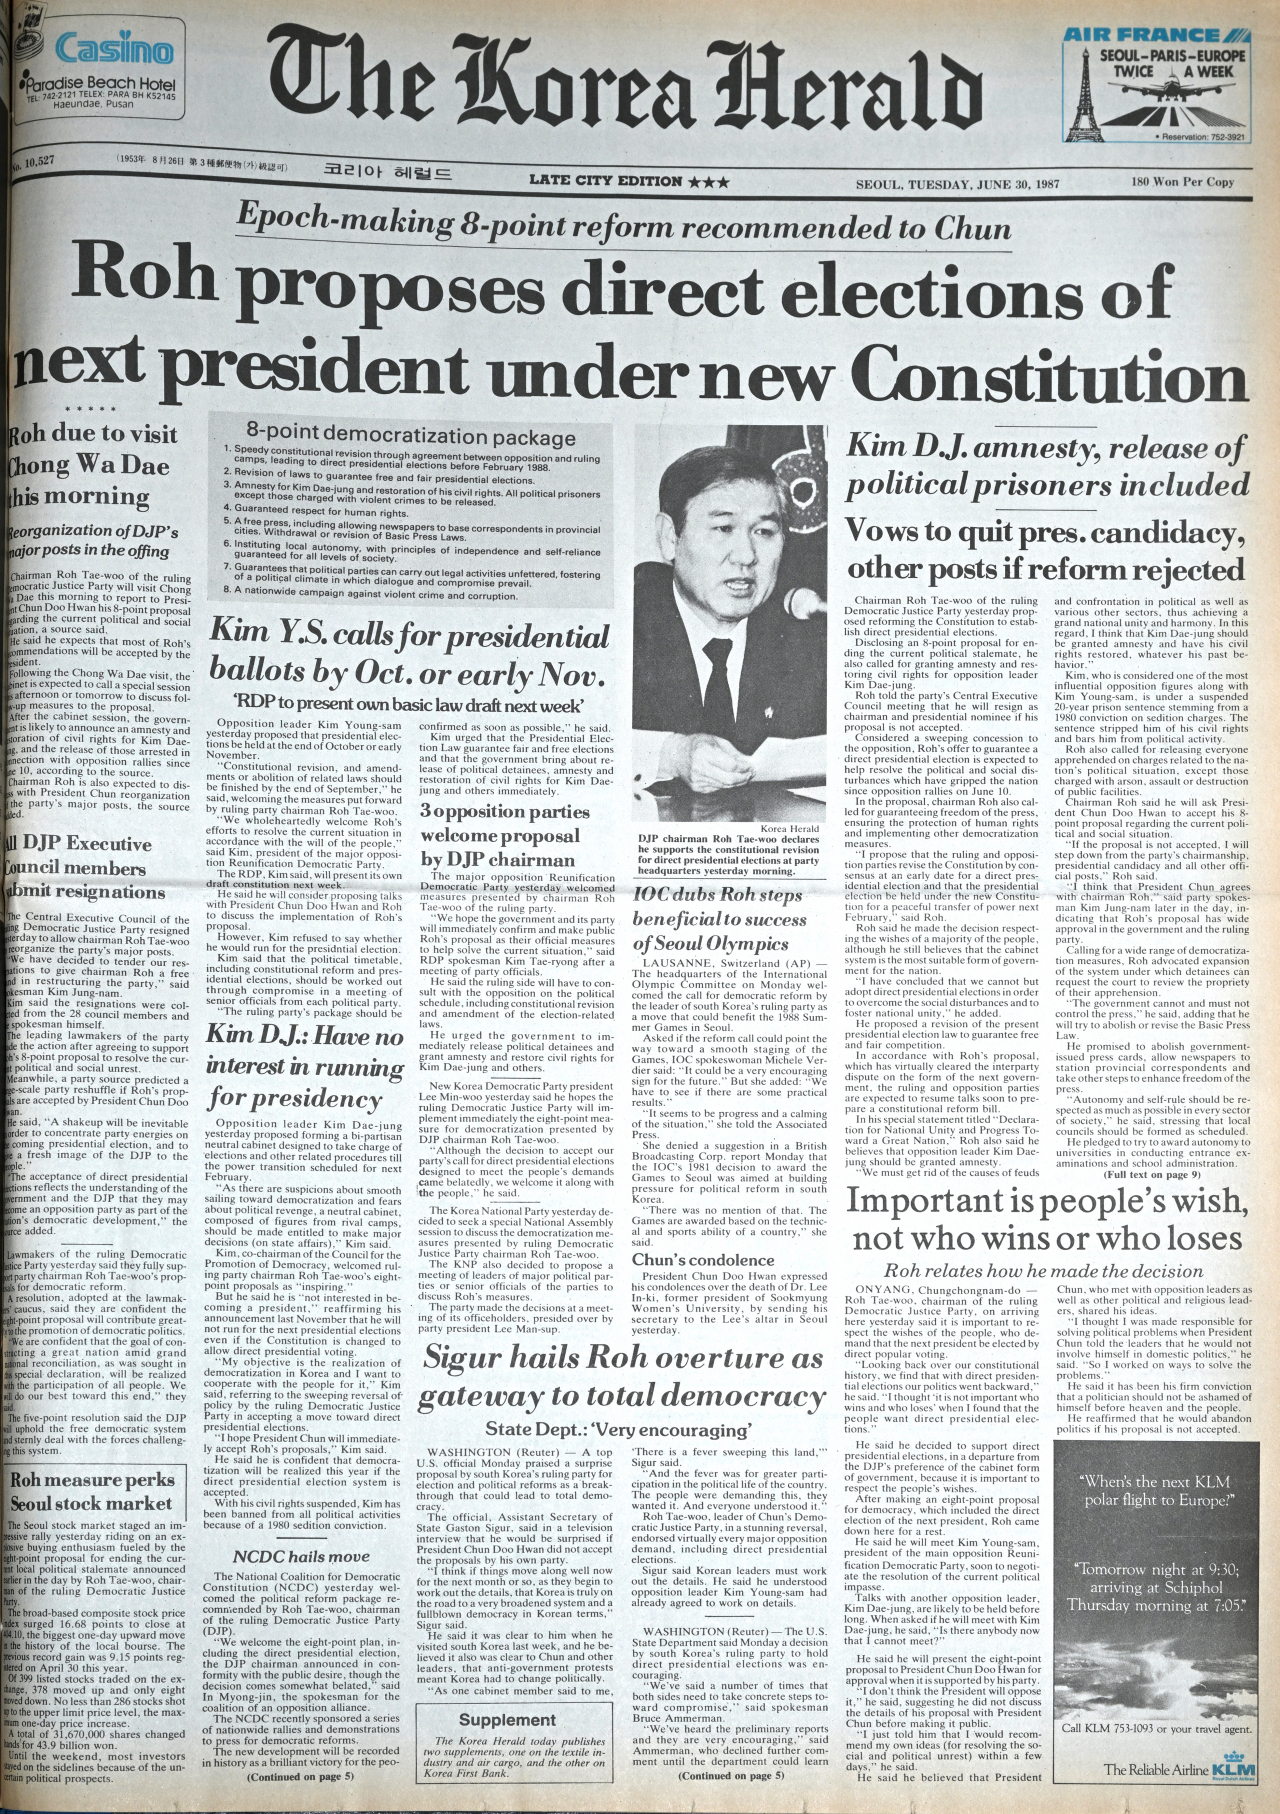 The June 30, 1987, edition of The Korea Herald